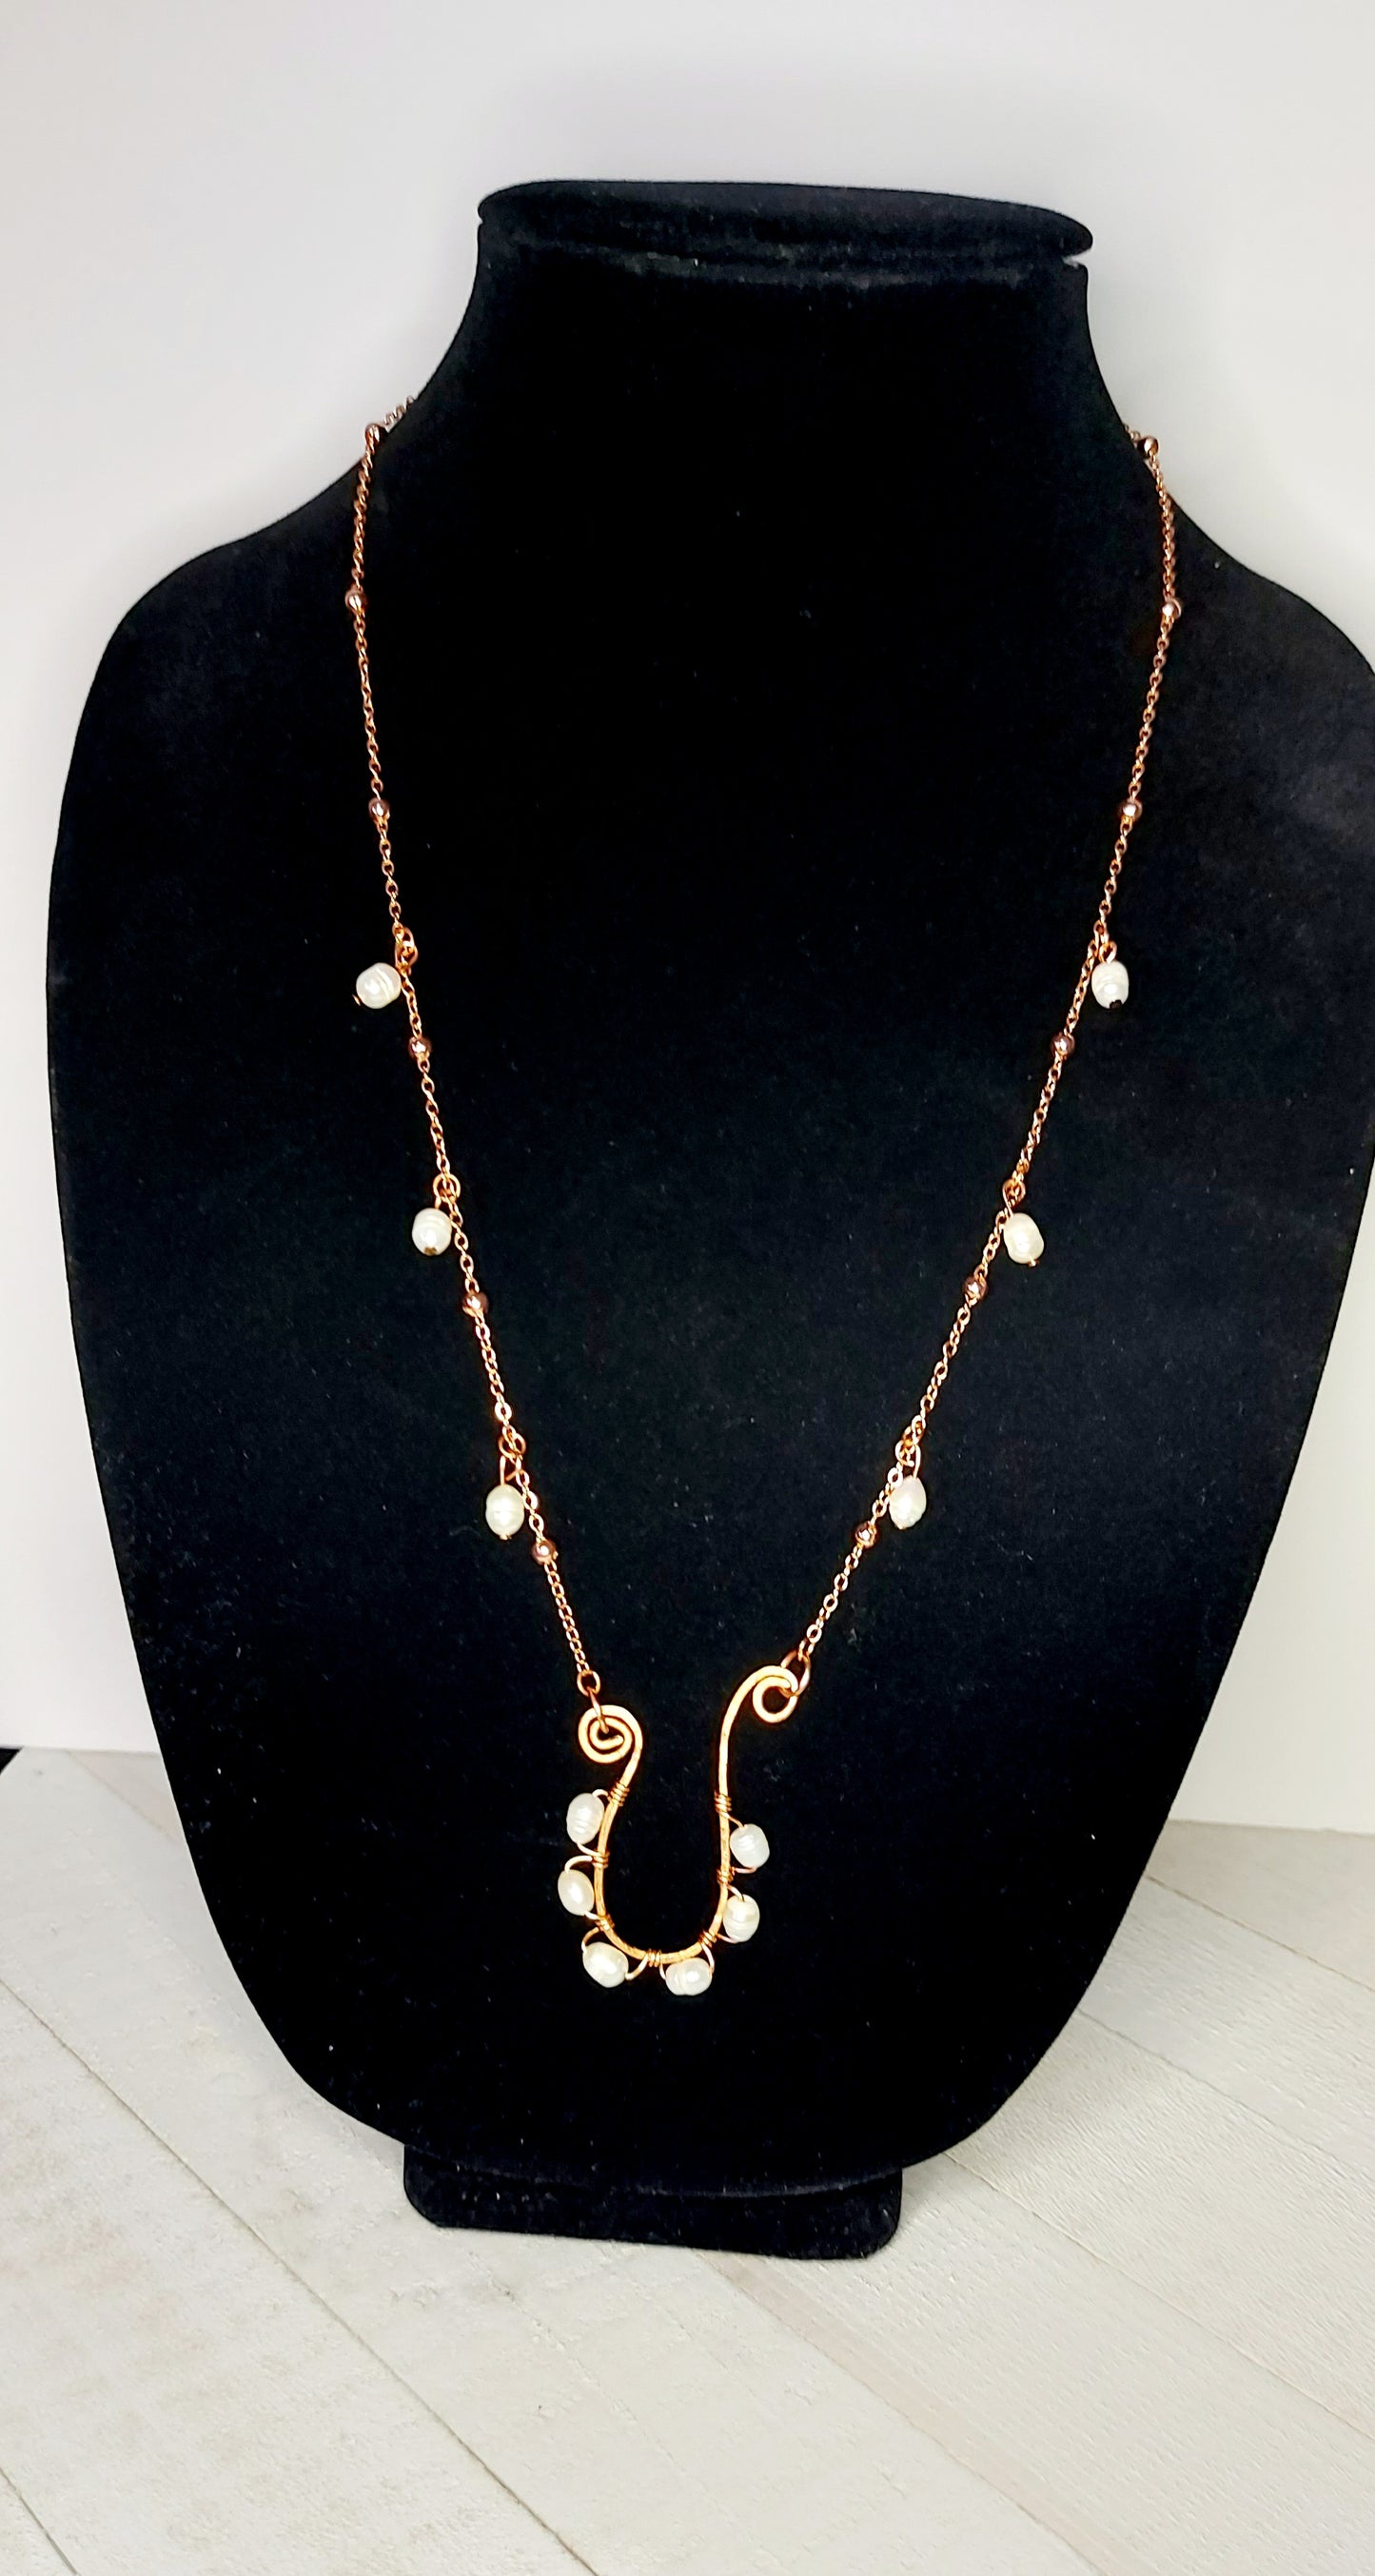 Pearl and Copper Necklace